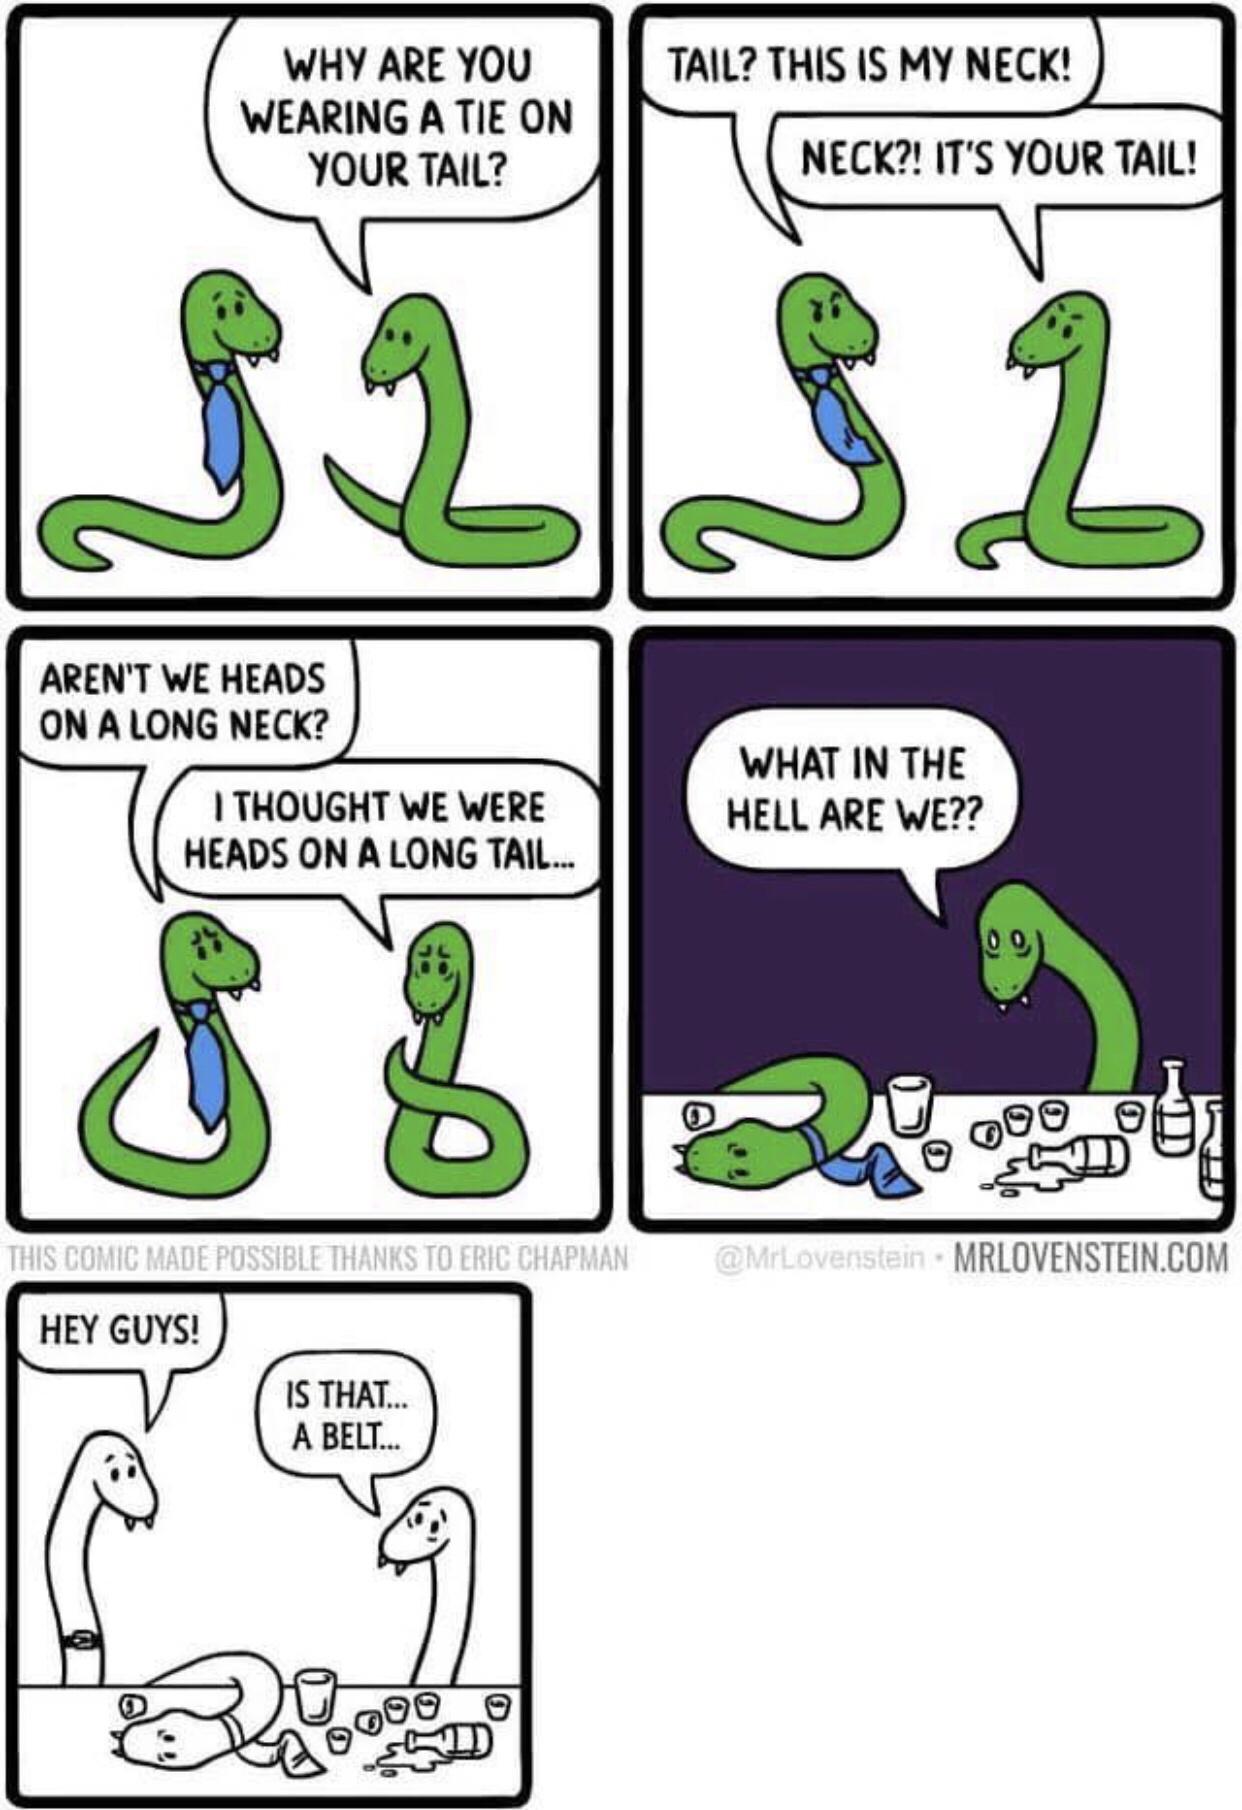 dark humor comic strips - Tail? This Is My Neck! Why Are You Wearing A Tie On Your Tail? Neck?! It'S Your Tail! S2 S2 Aren'T We Heads On A Long Neck? I Thought We Were Heads On A Long Tail... What In The Hell Are We?? 000 e This Comic Made Possible Thanks